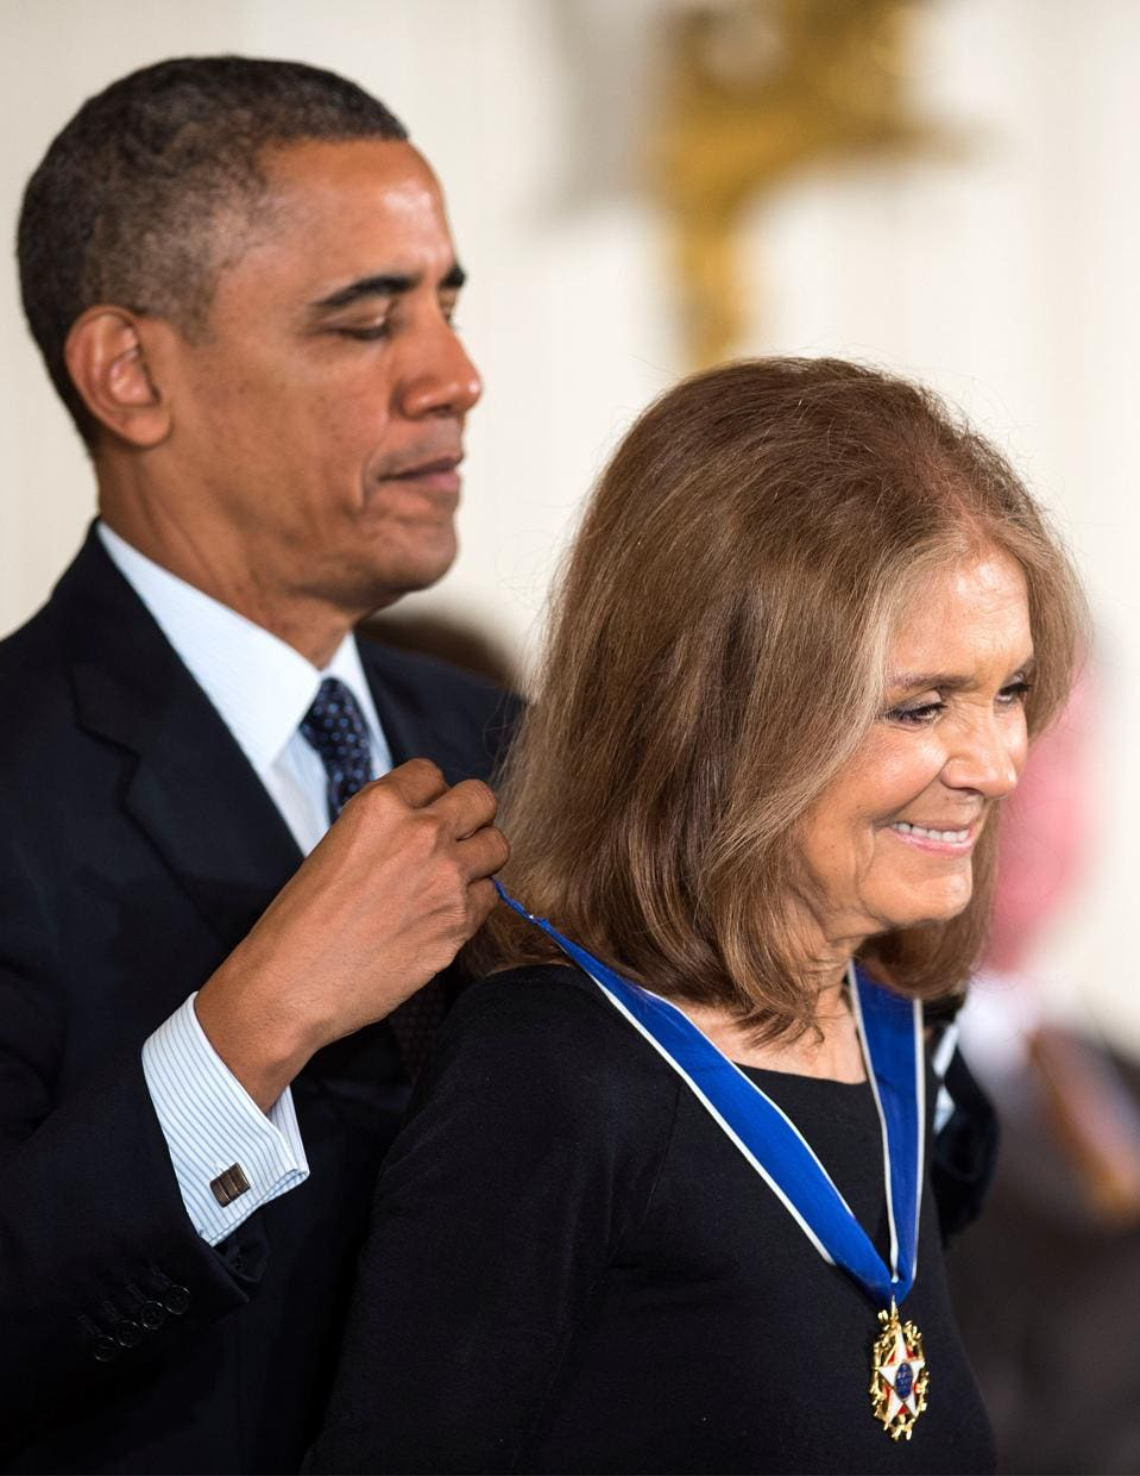 Gloria receiving the Presidential Medal of Freedom from President Barack Obama